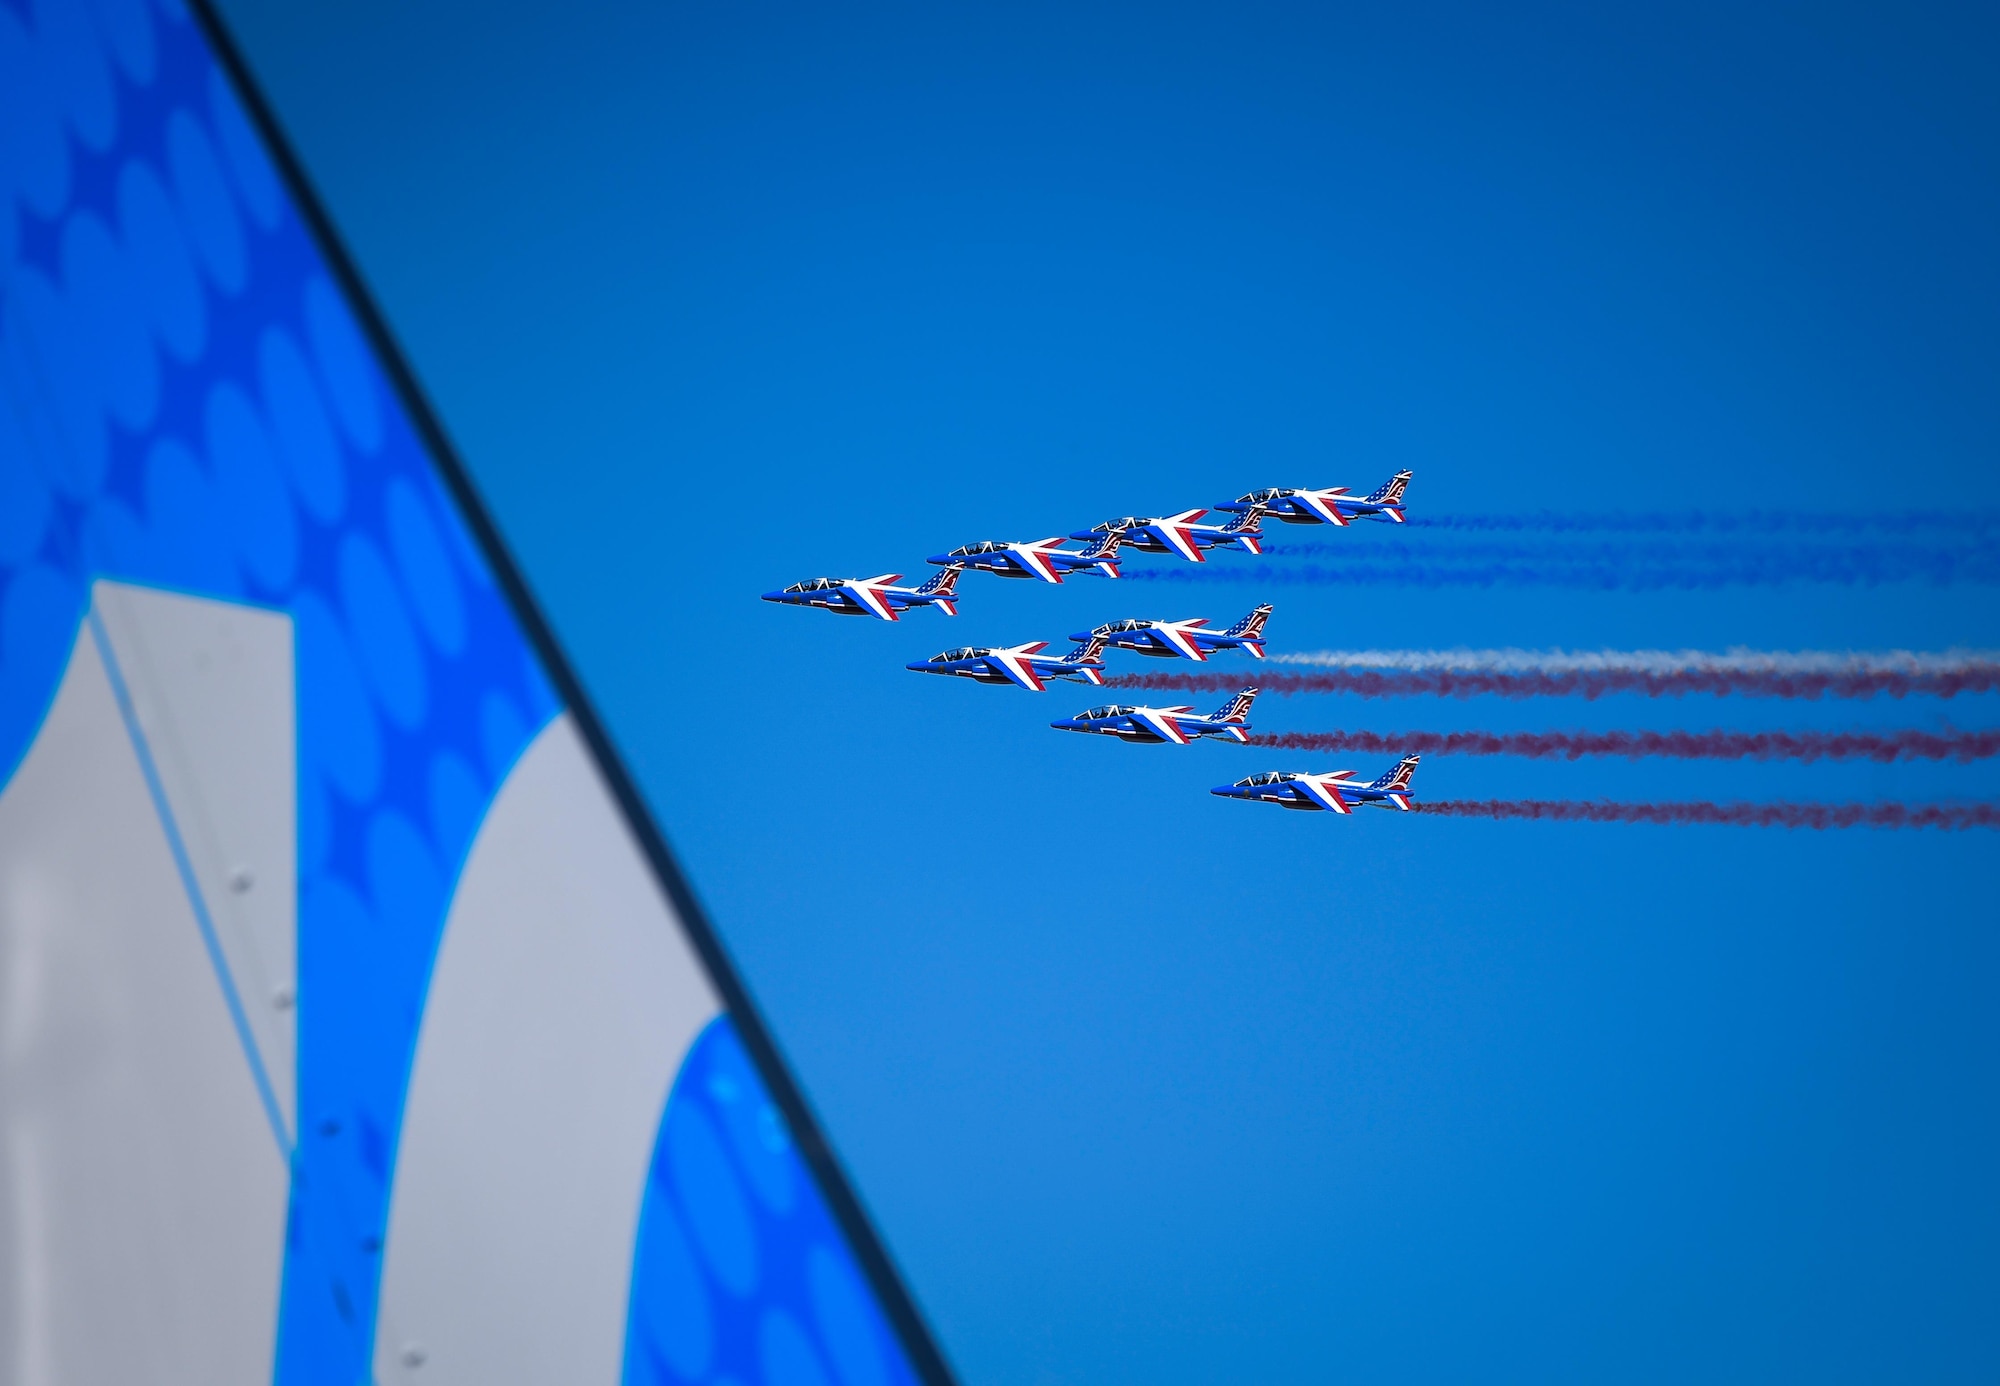 The Patrouille de France air demonstration team performs a flyby to signify the official start of the Paris Air Show June 19, 2017 at Le Bourget, France. Held every year, the Paris Air Show represents a unique opportunity for the United States to showcase its leadership in aerospace technologies. Direct participation in the air show supports U.S. government security policy and strategic defense objectives. (U.S. Air Force photo/ Tech. Sgt. Ryan Crane)